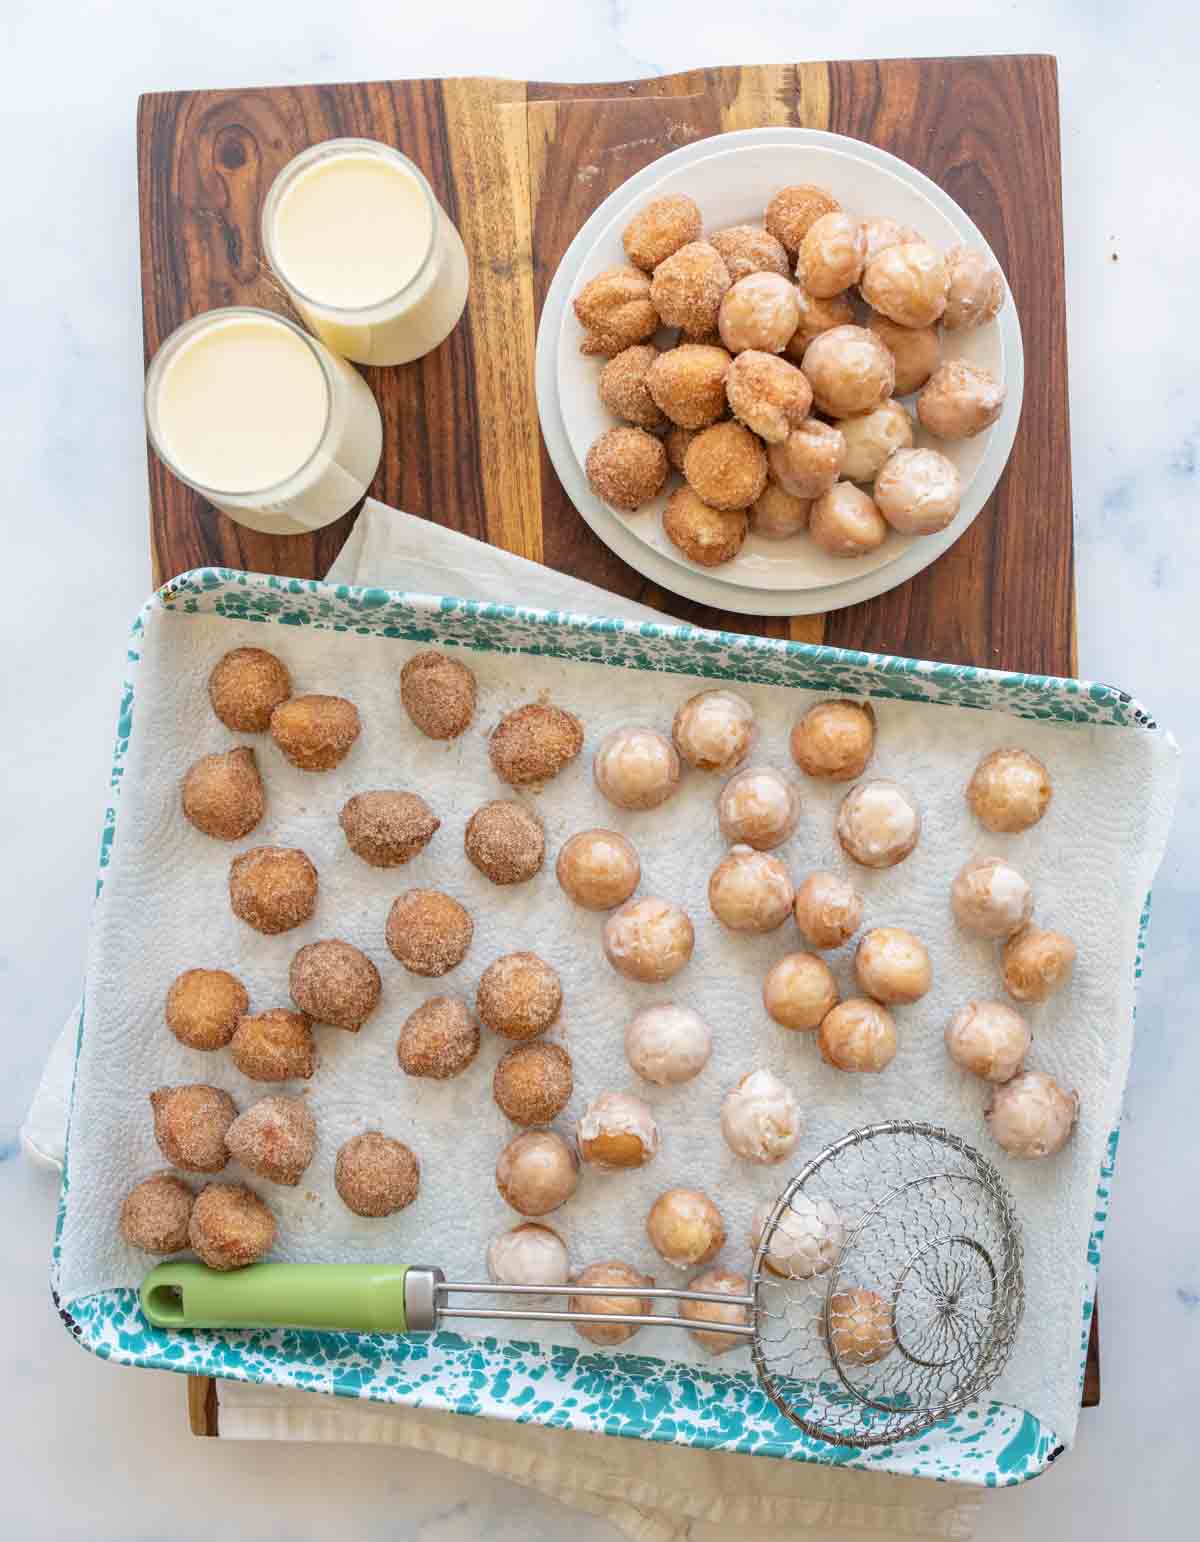 round iced and sugar donut hole bites on a baking dish